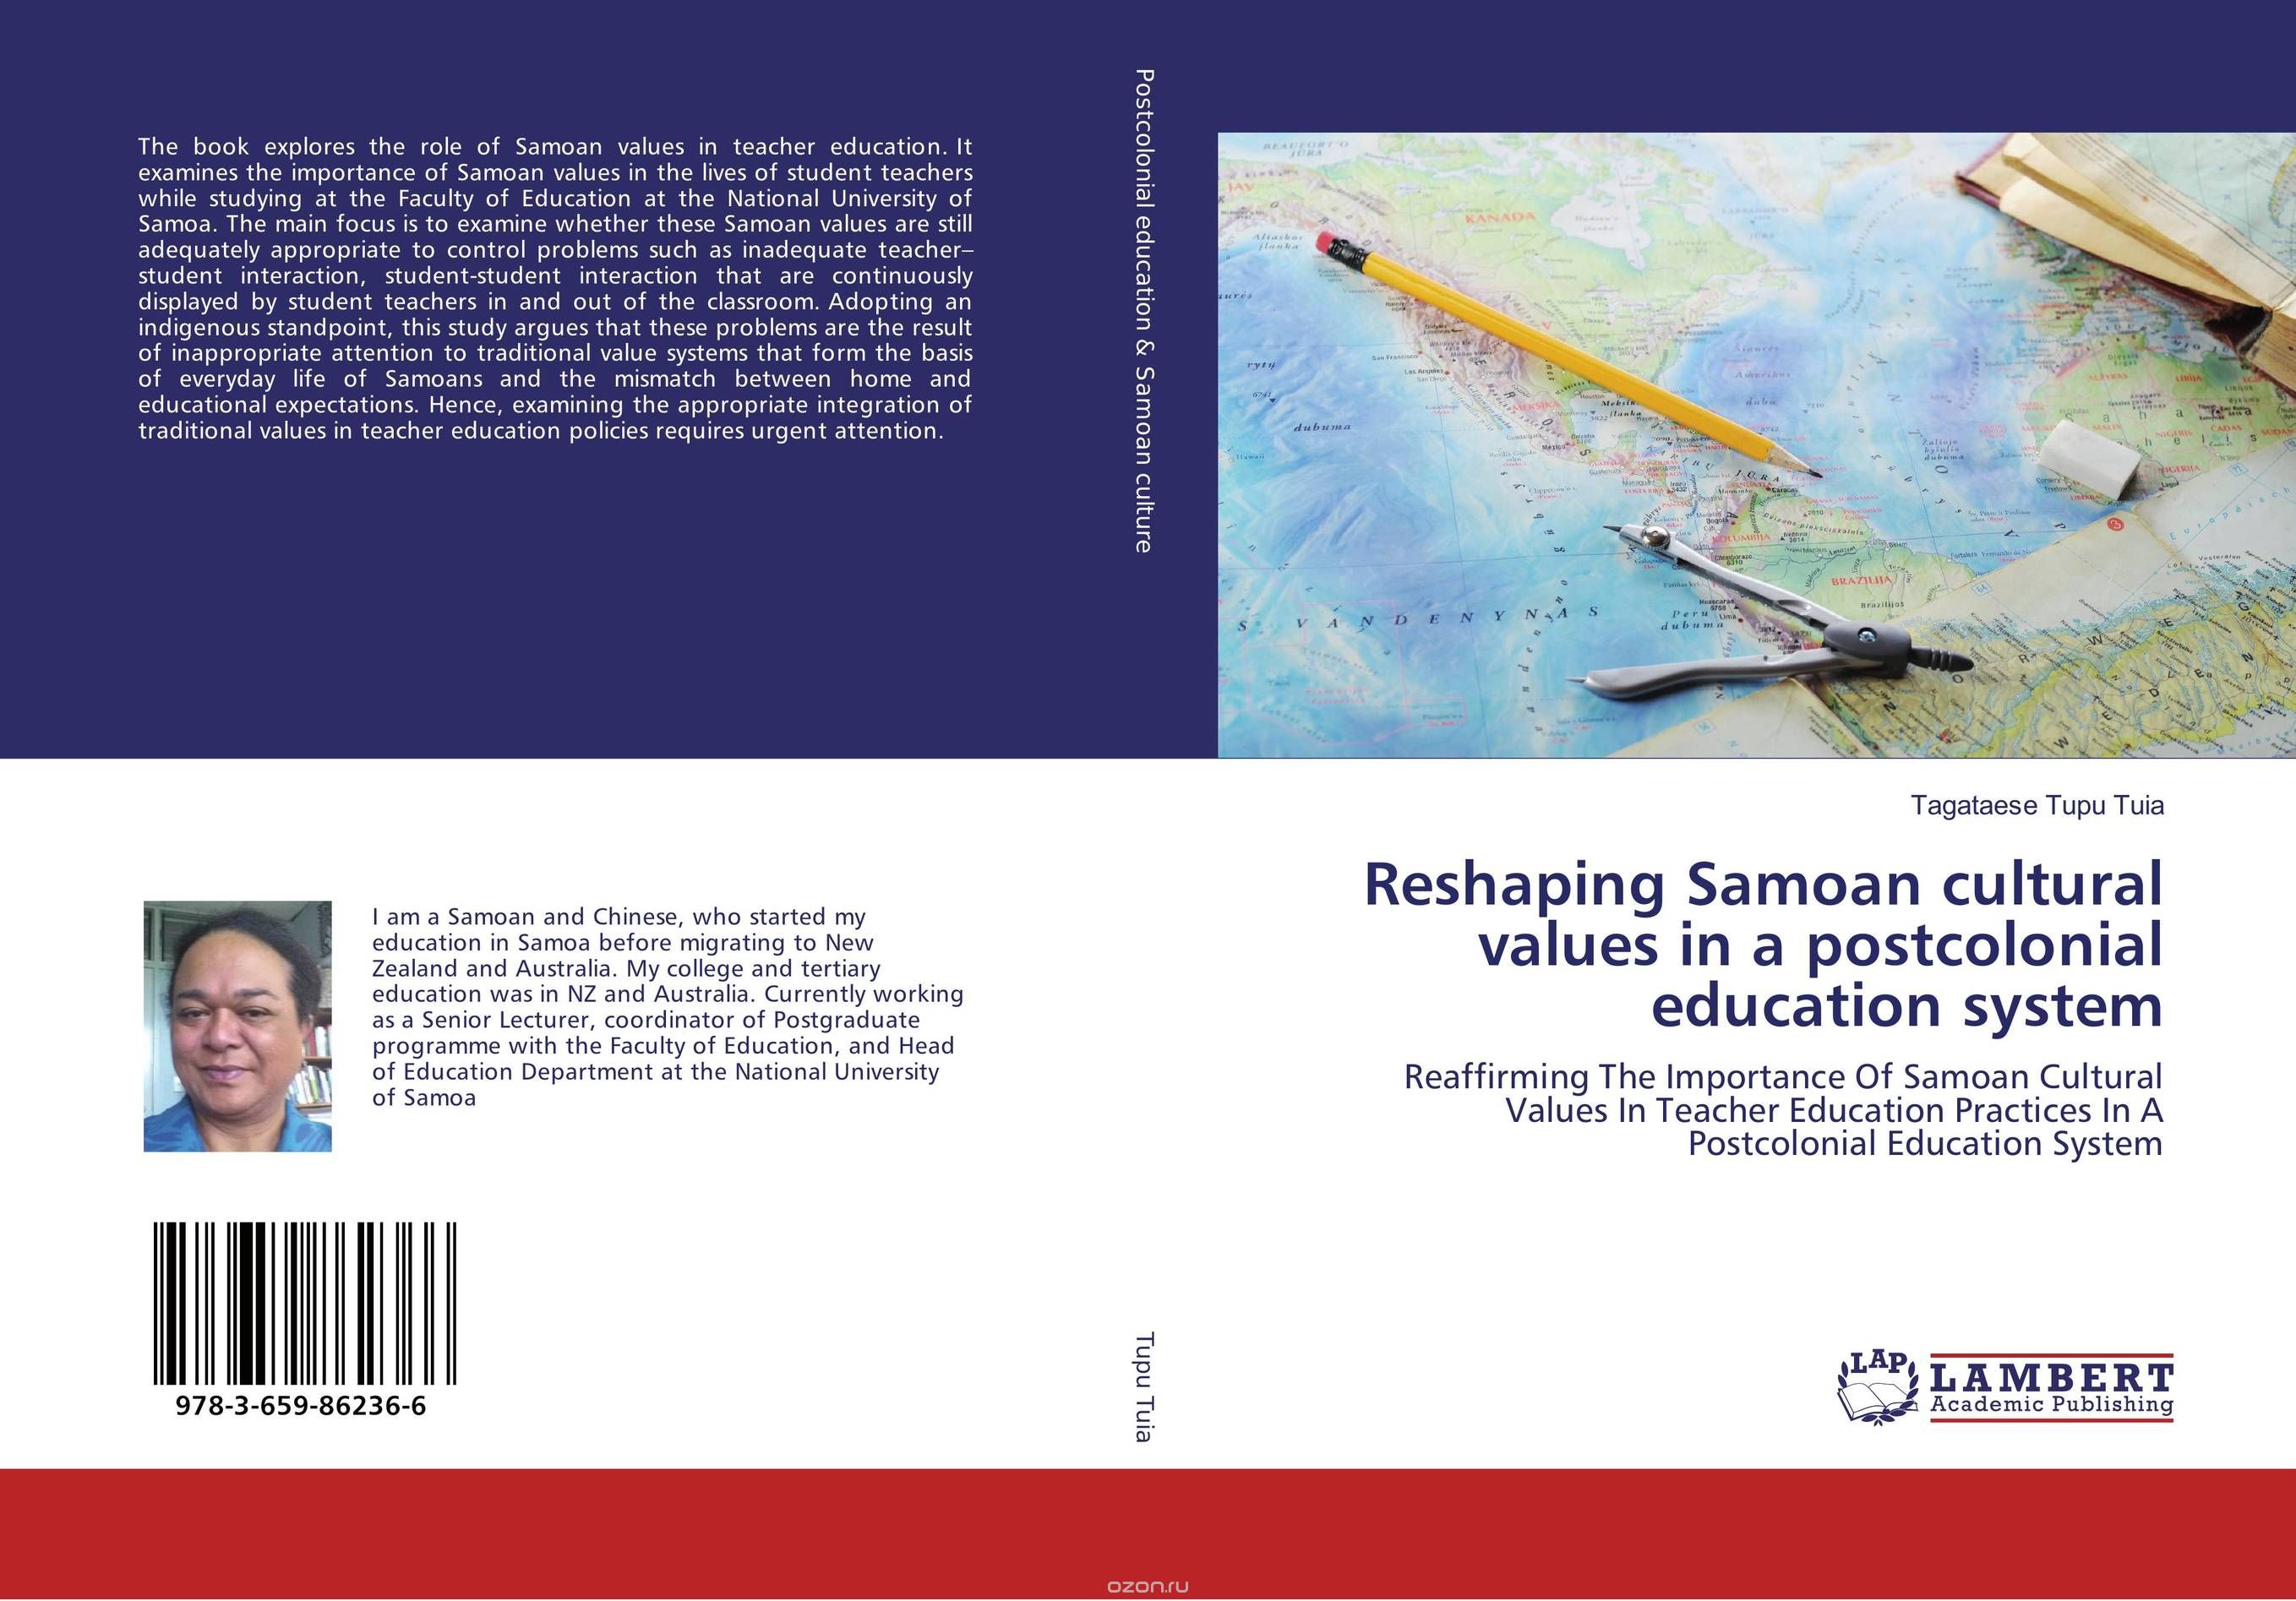 Reshaping Samoan cultural values in a postcolonial education system